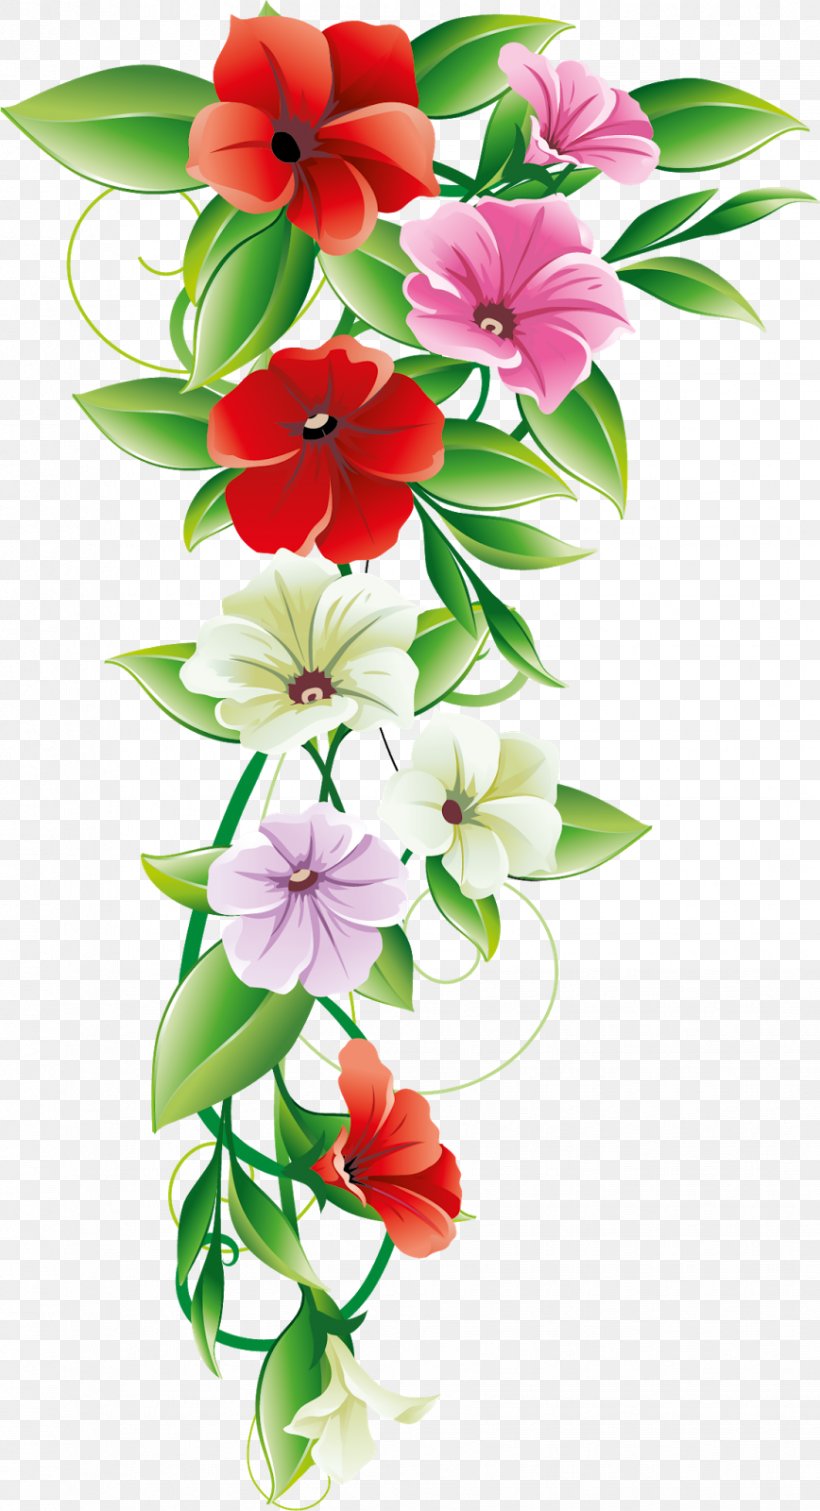 Flower Floral Design Stock Photography Clip Art, PNG, 868x1600px ...